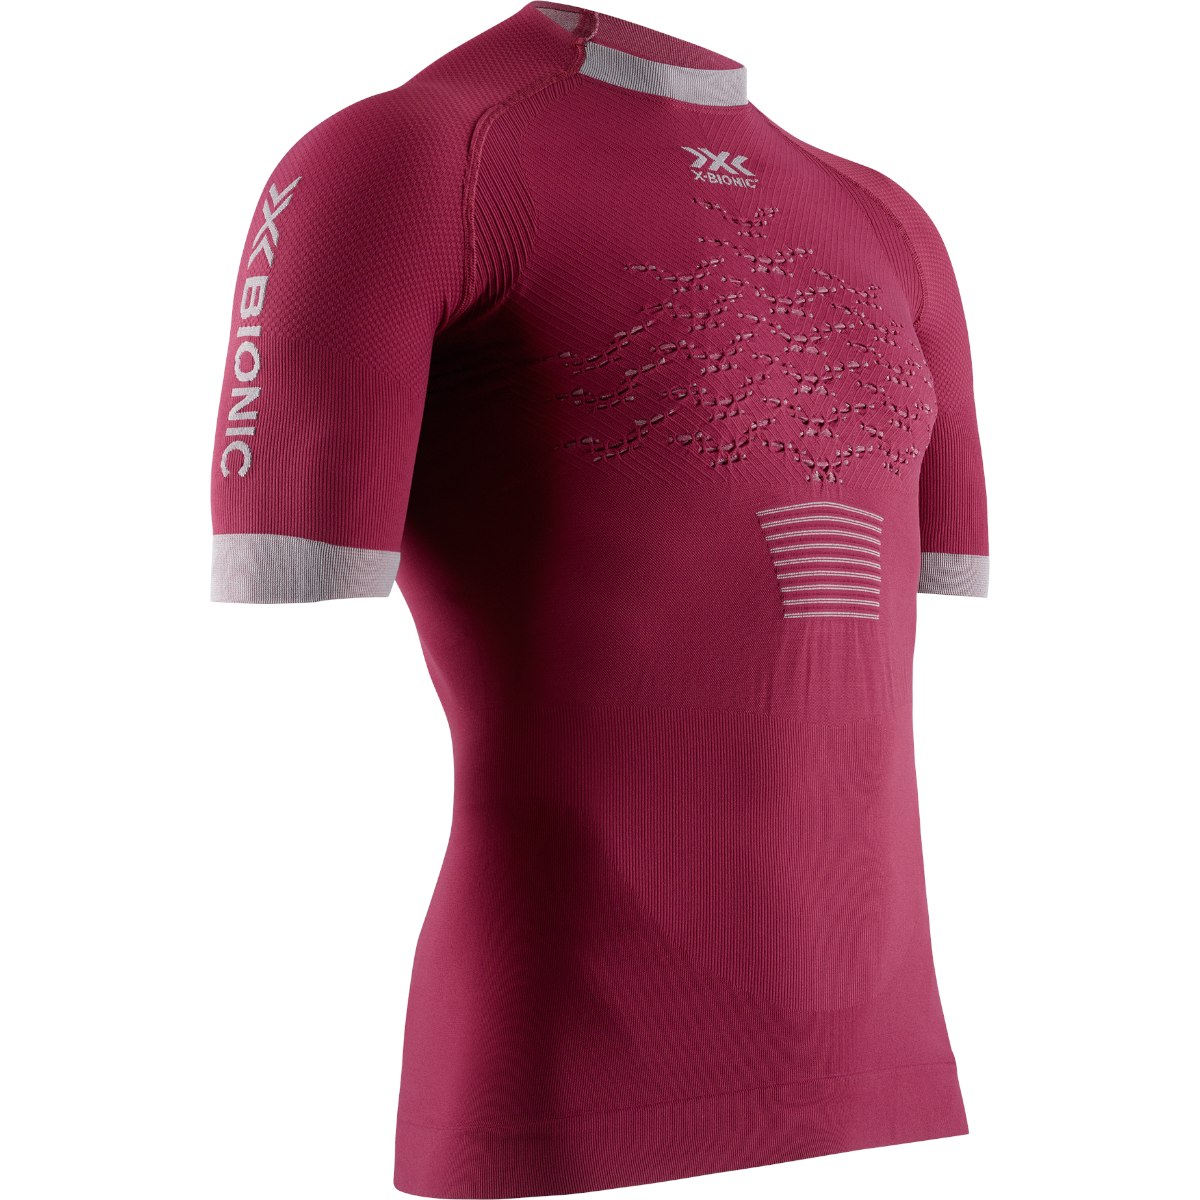 Picture of X-Bionic The Trick 4.0 Run Shirt Short Sleeves for Men - namib red/dolomite grey